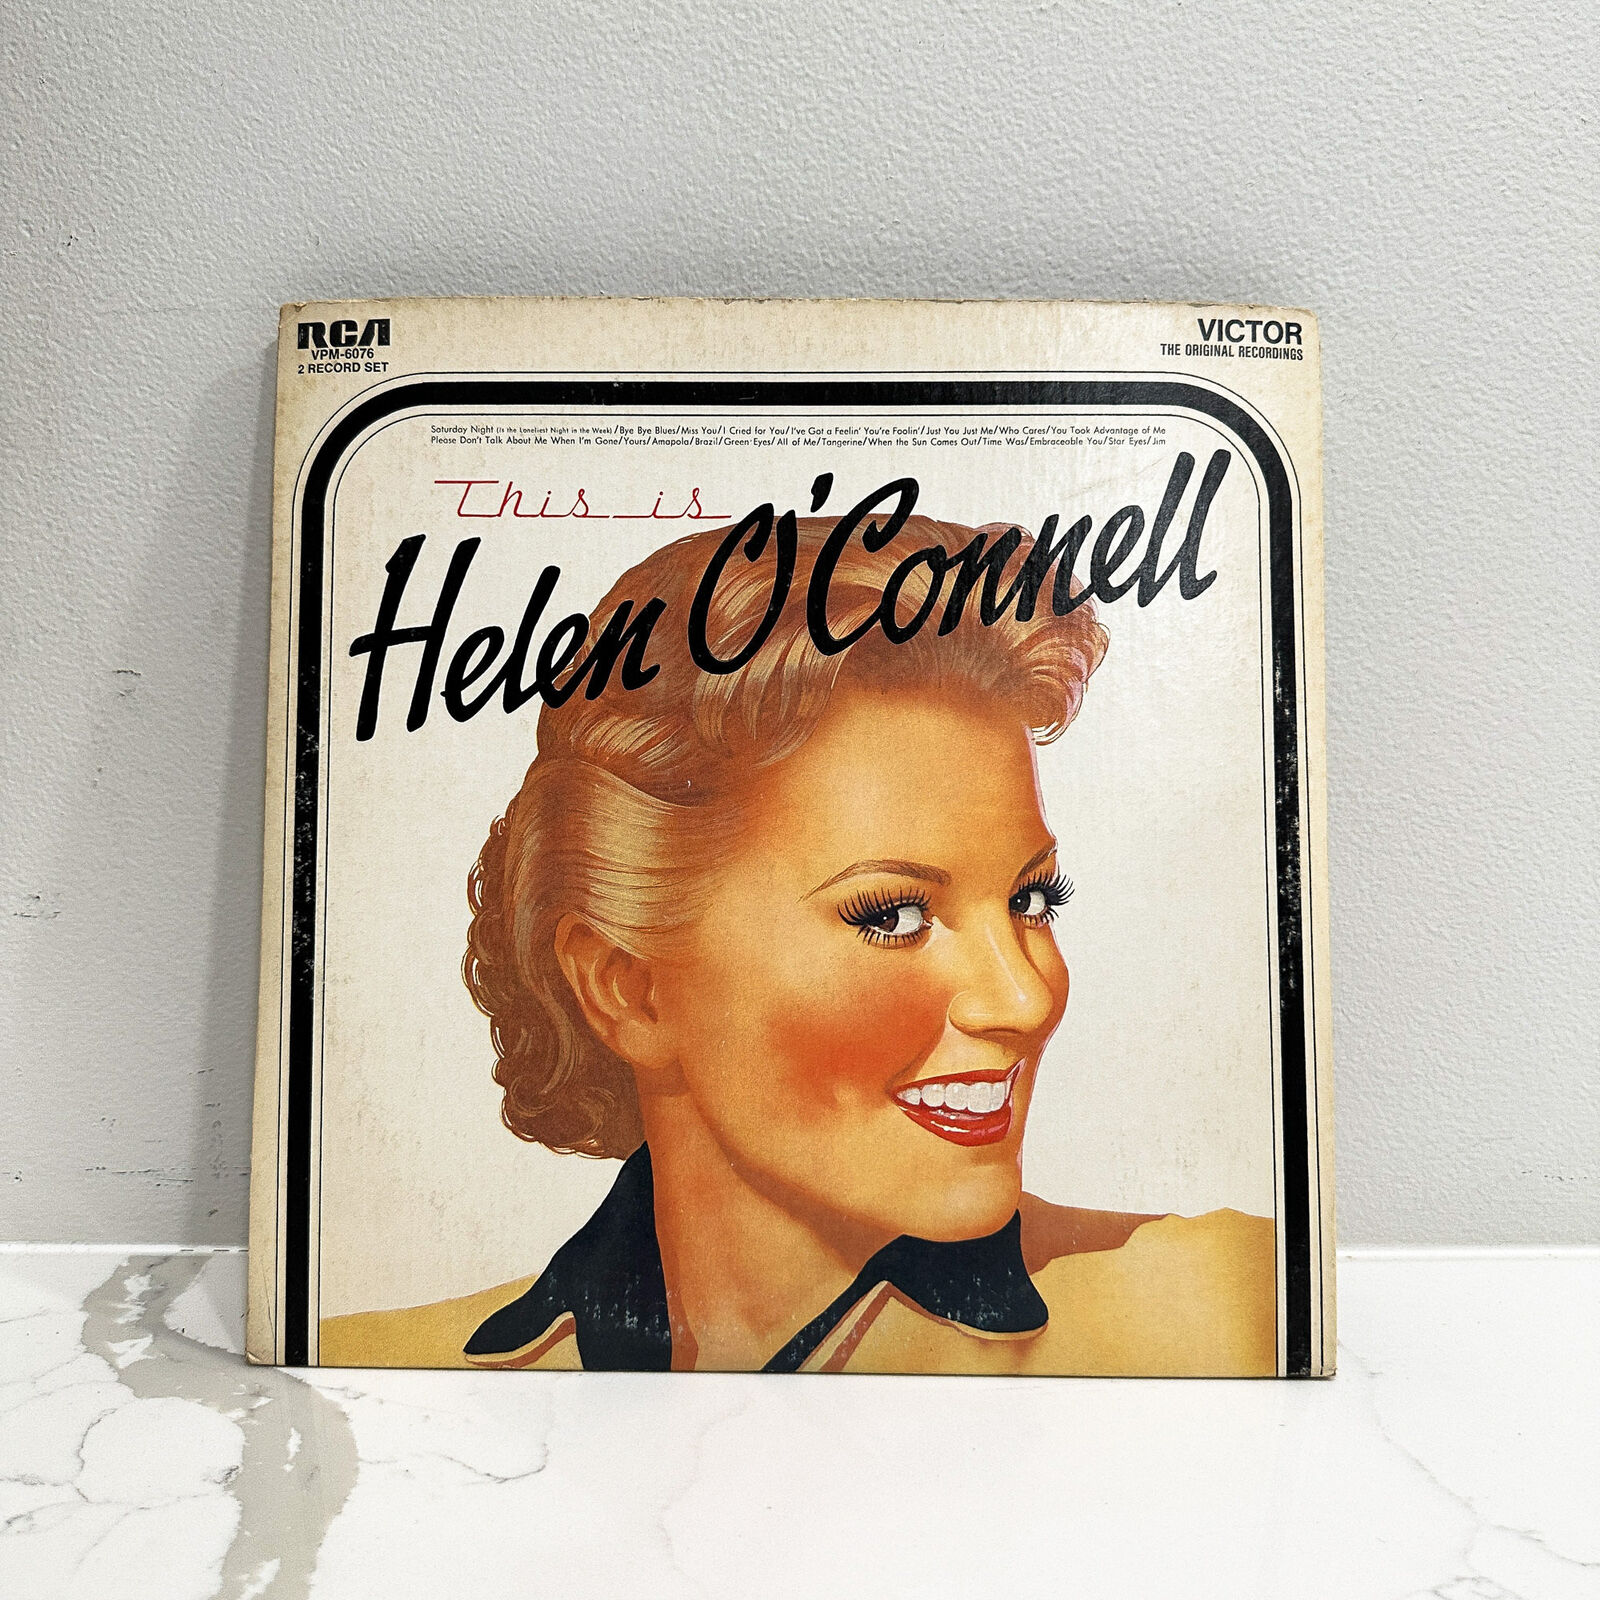 Helen O'Connell – This Is Helen O'Connell - Vinyl LP Record - 1972